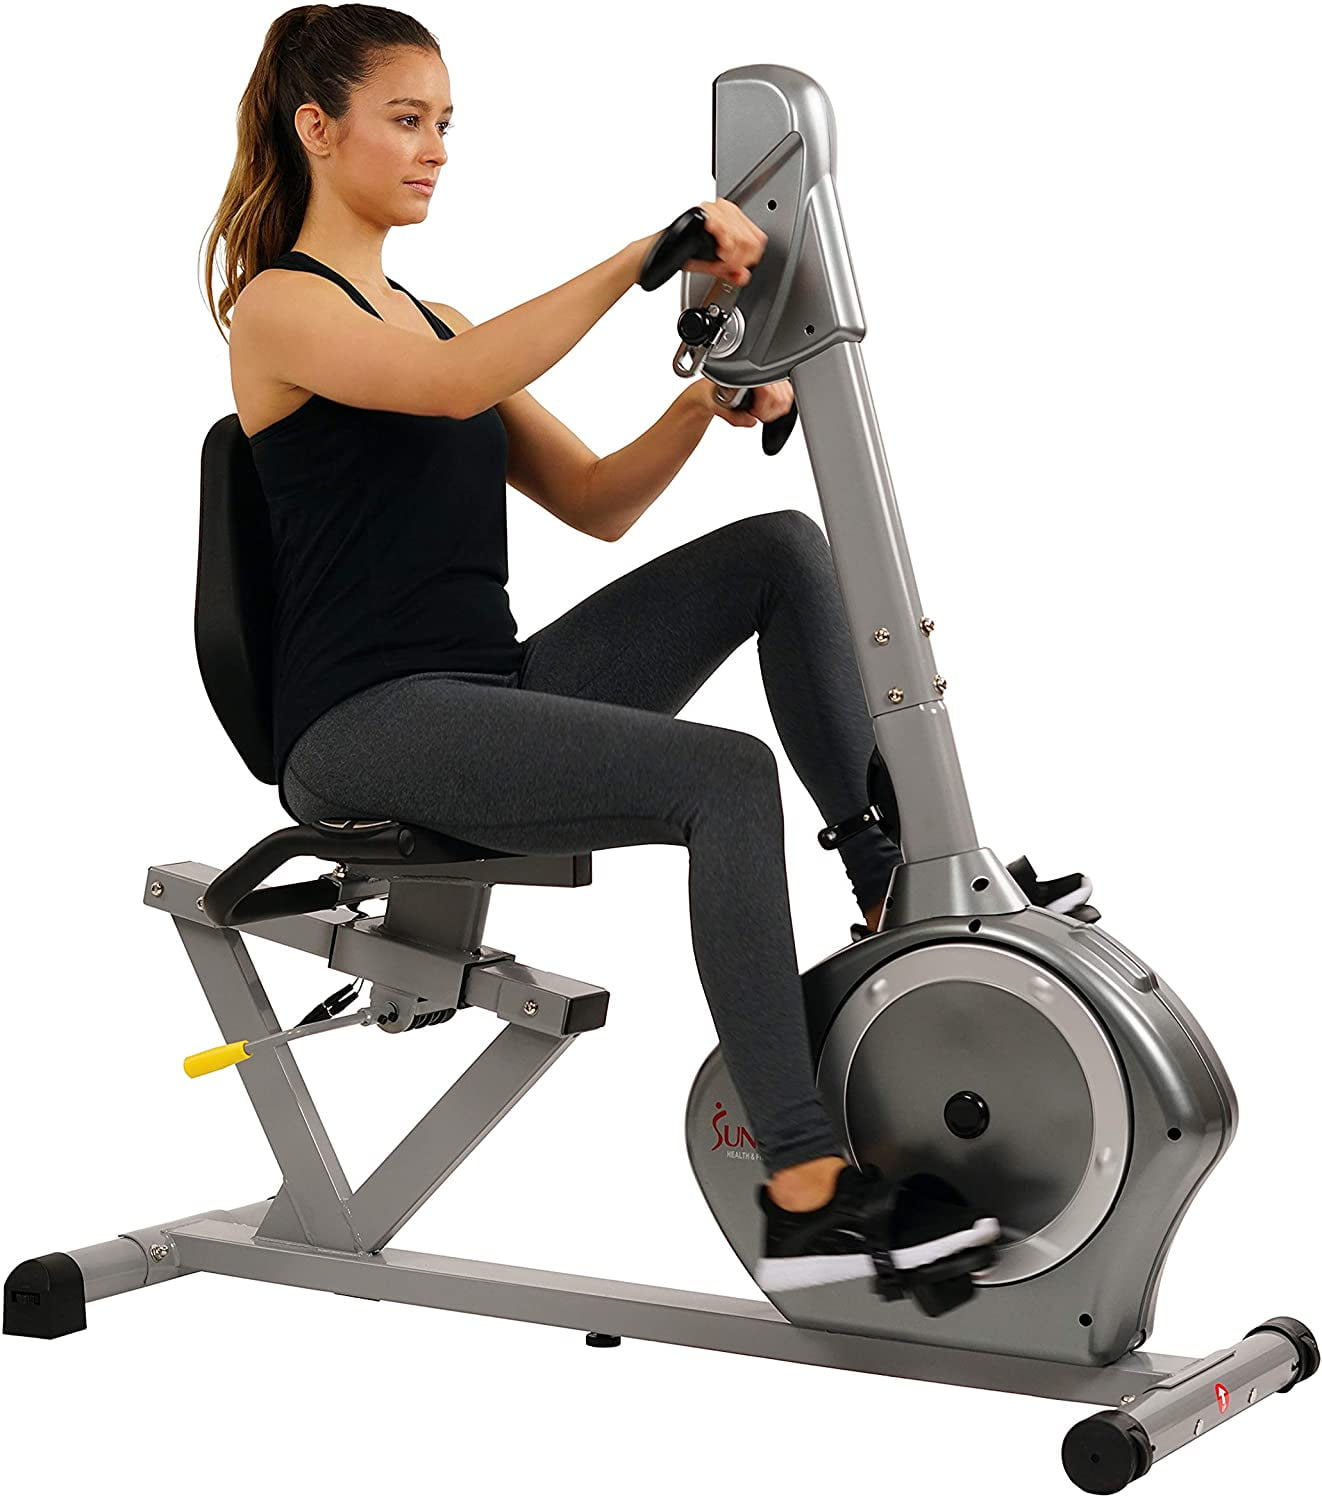 Sunny Health &amp; Fitness Magnetic Recumbent Bike Exercise Bike, 350lb High Weight Capacity, Arm Exercisers, Monitor, Pulse Rate Monitoring - SF-RB4631